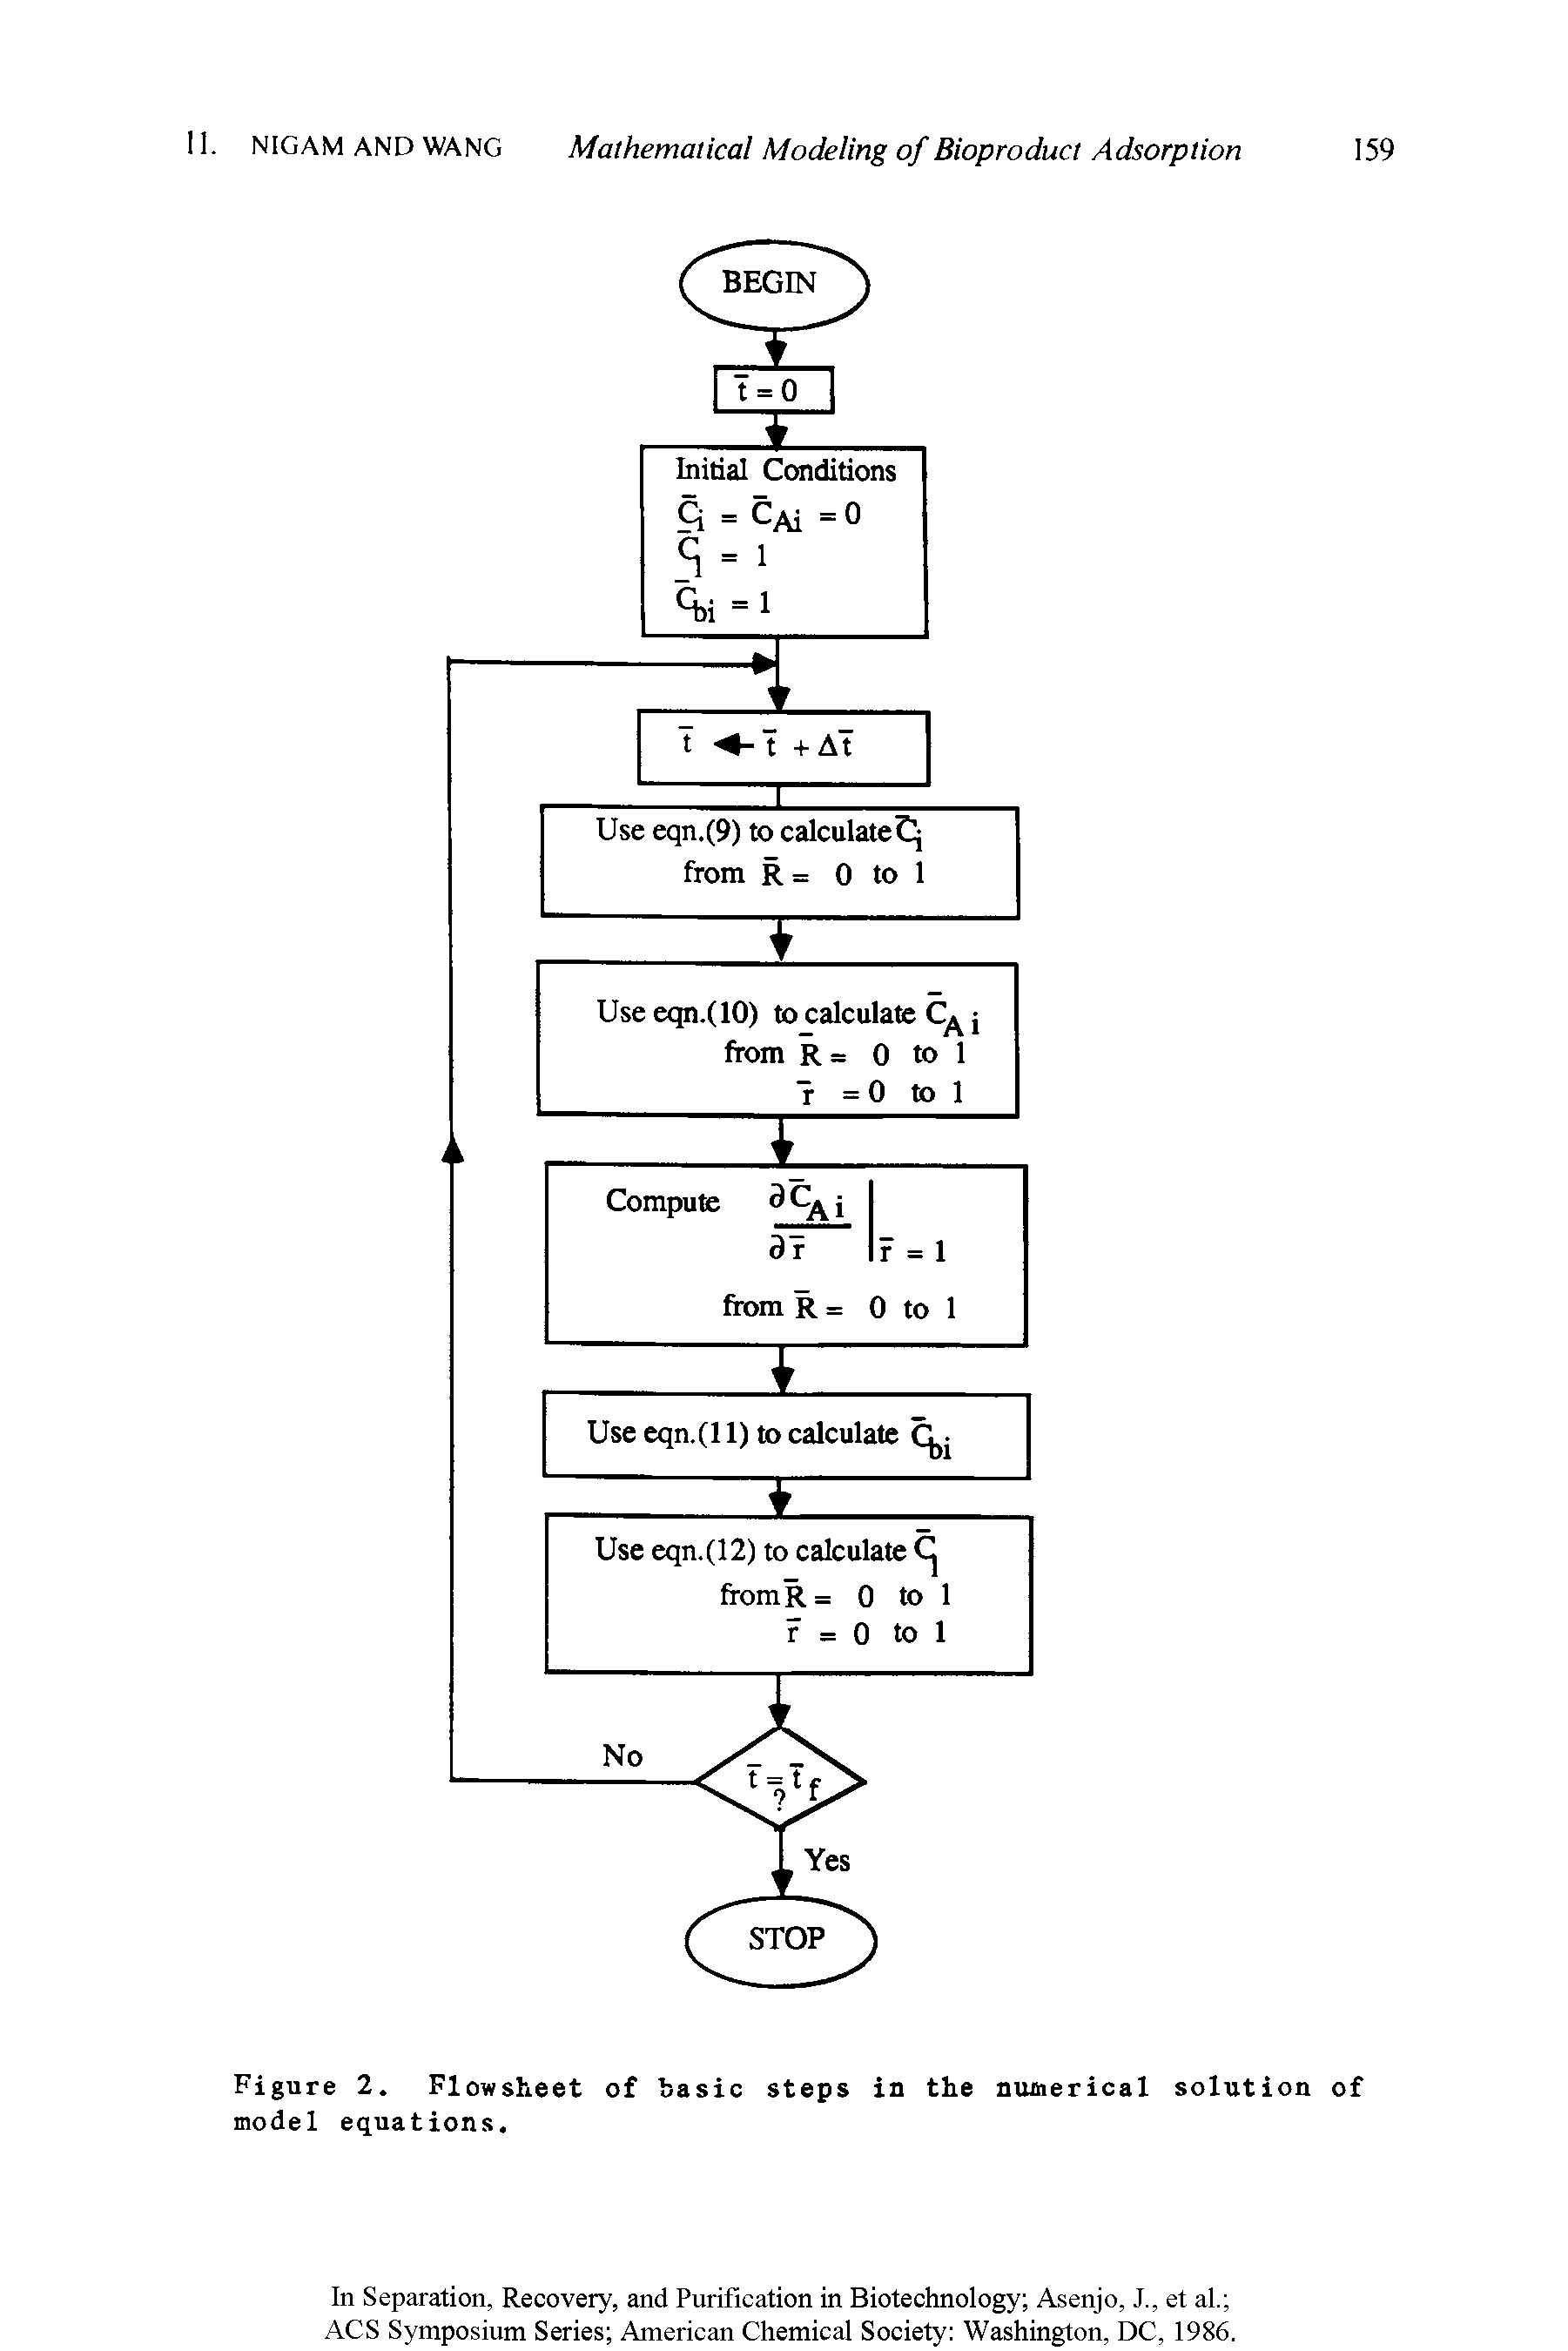 Figure 2. Flowsheet of basic steps in the numerical solution of model equations.